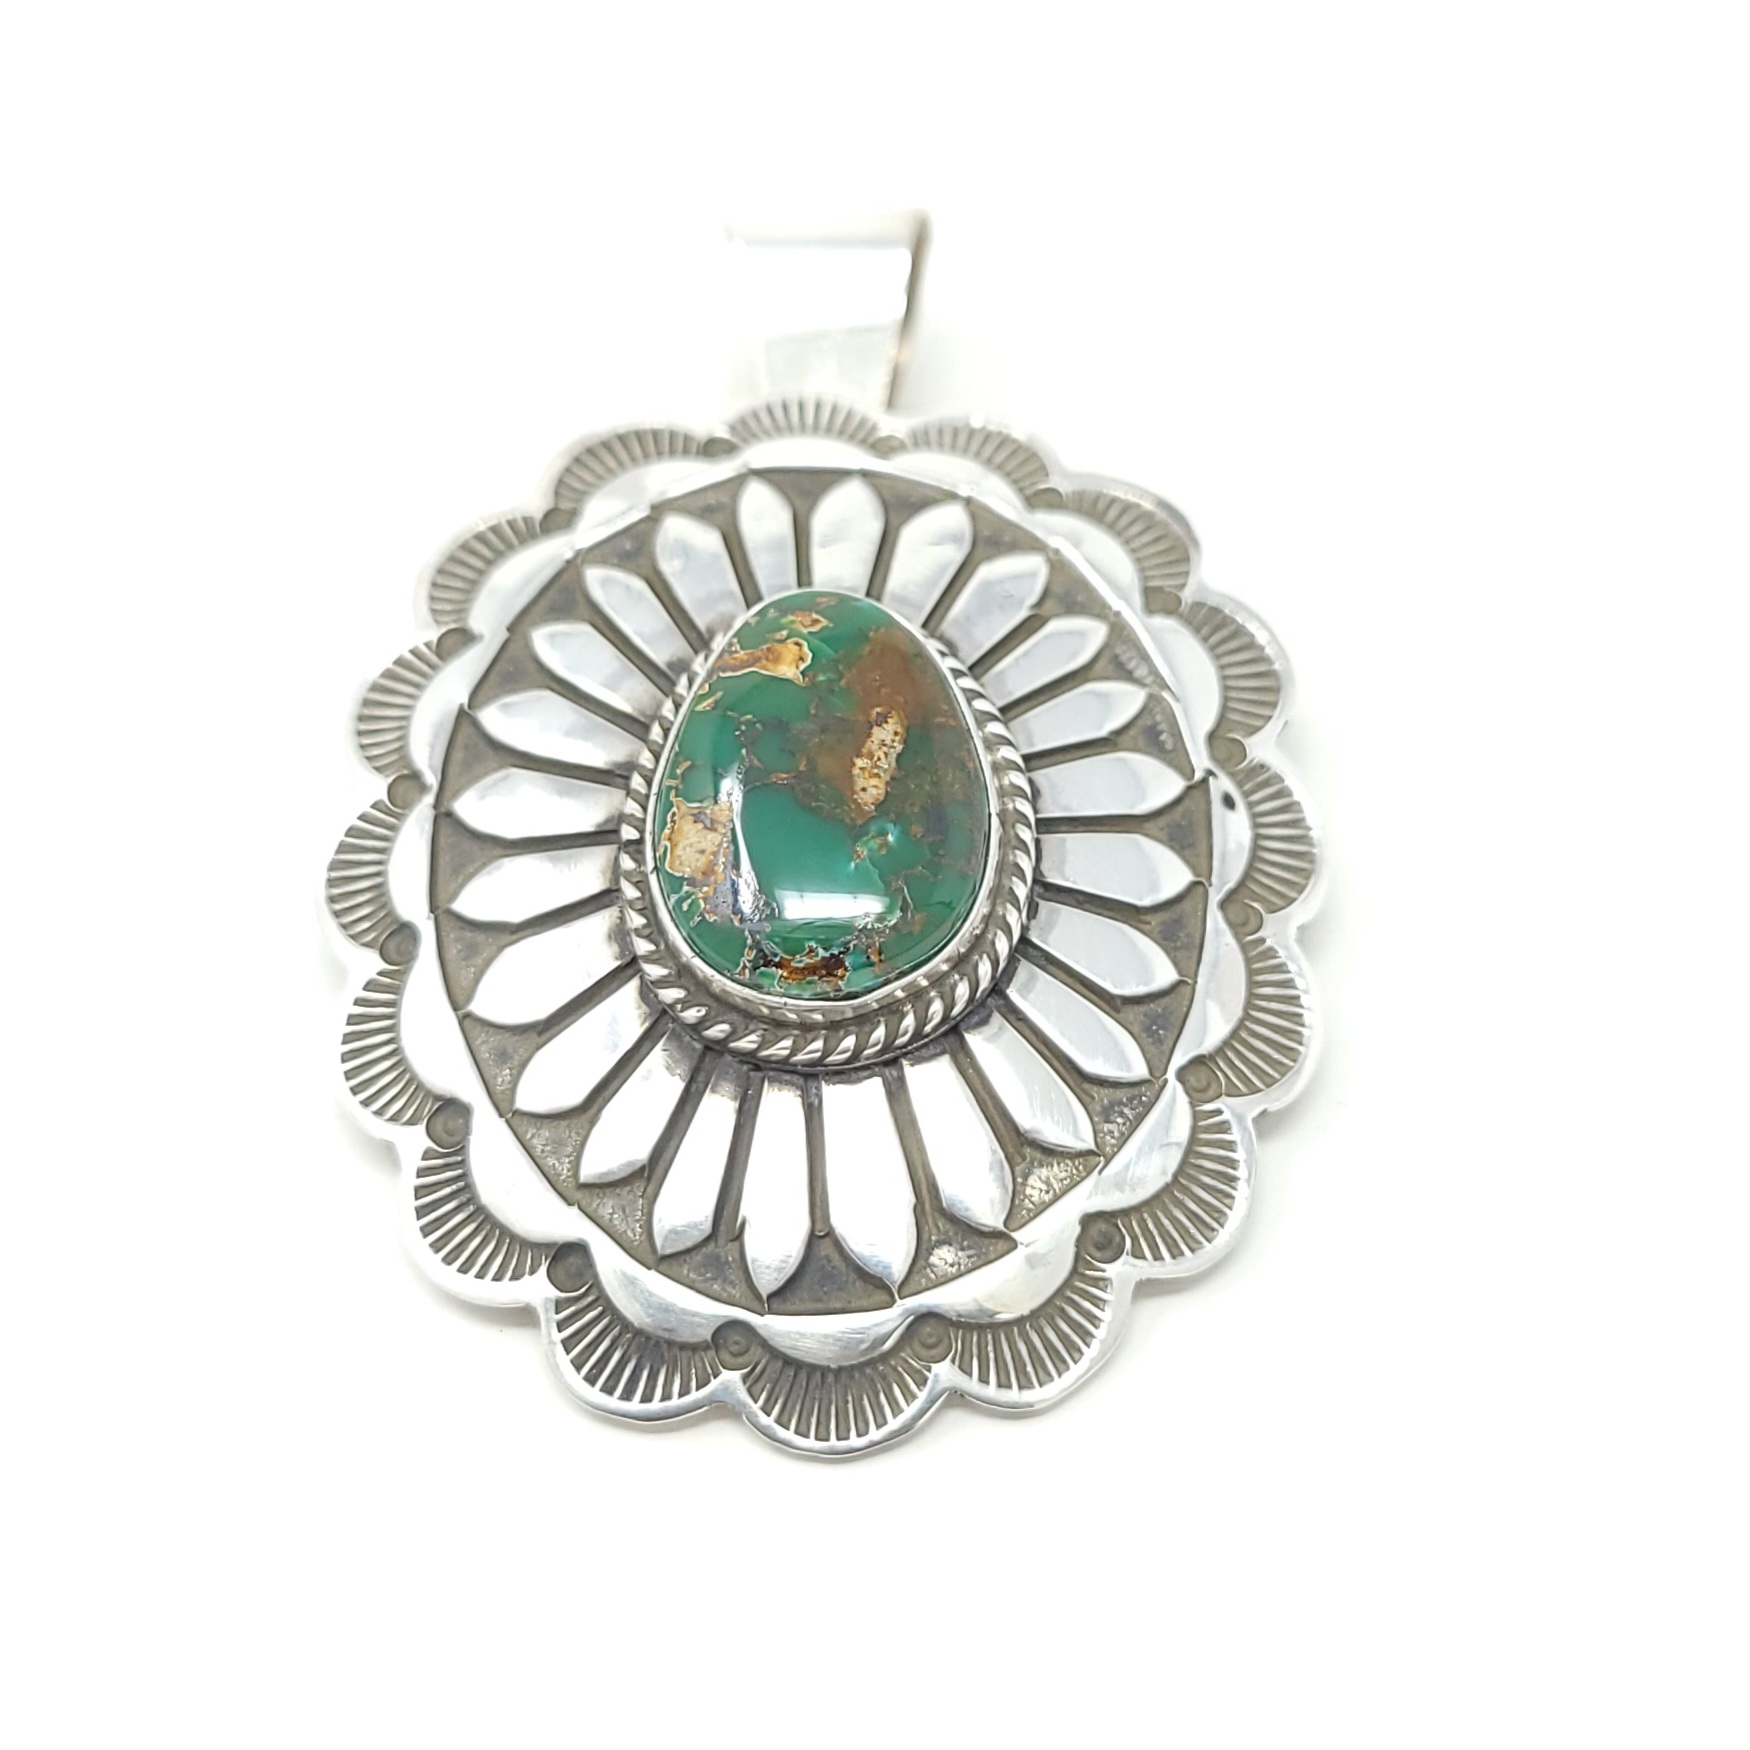 Andy Cadman Handmade Navajo Sterling Silver Old Style Pendant Royston Turquoise